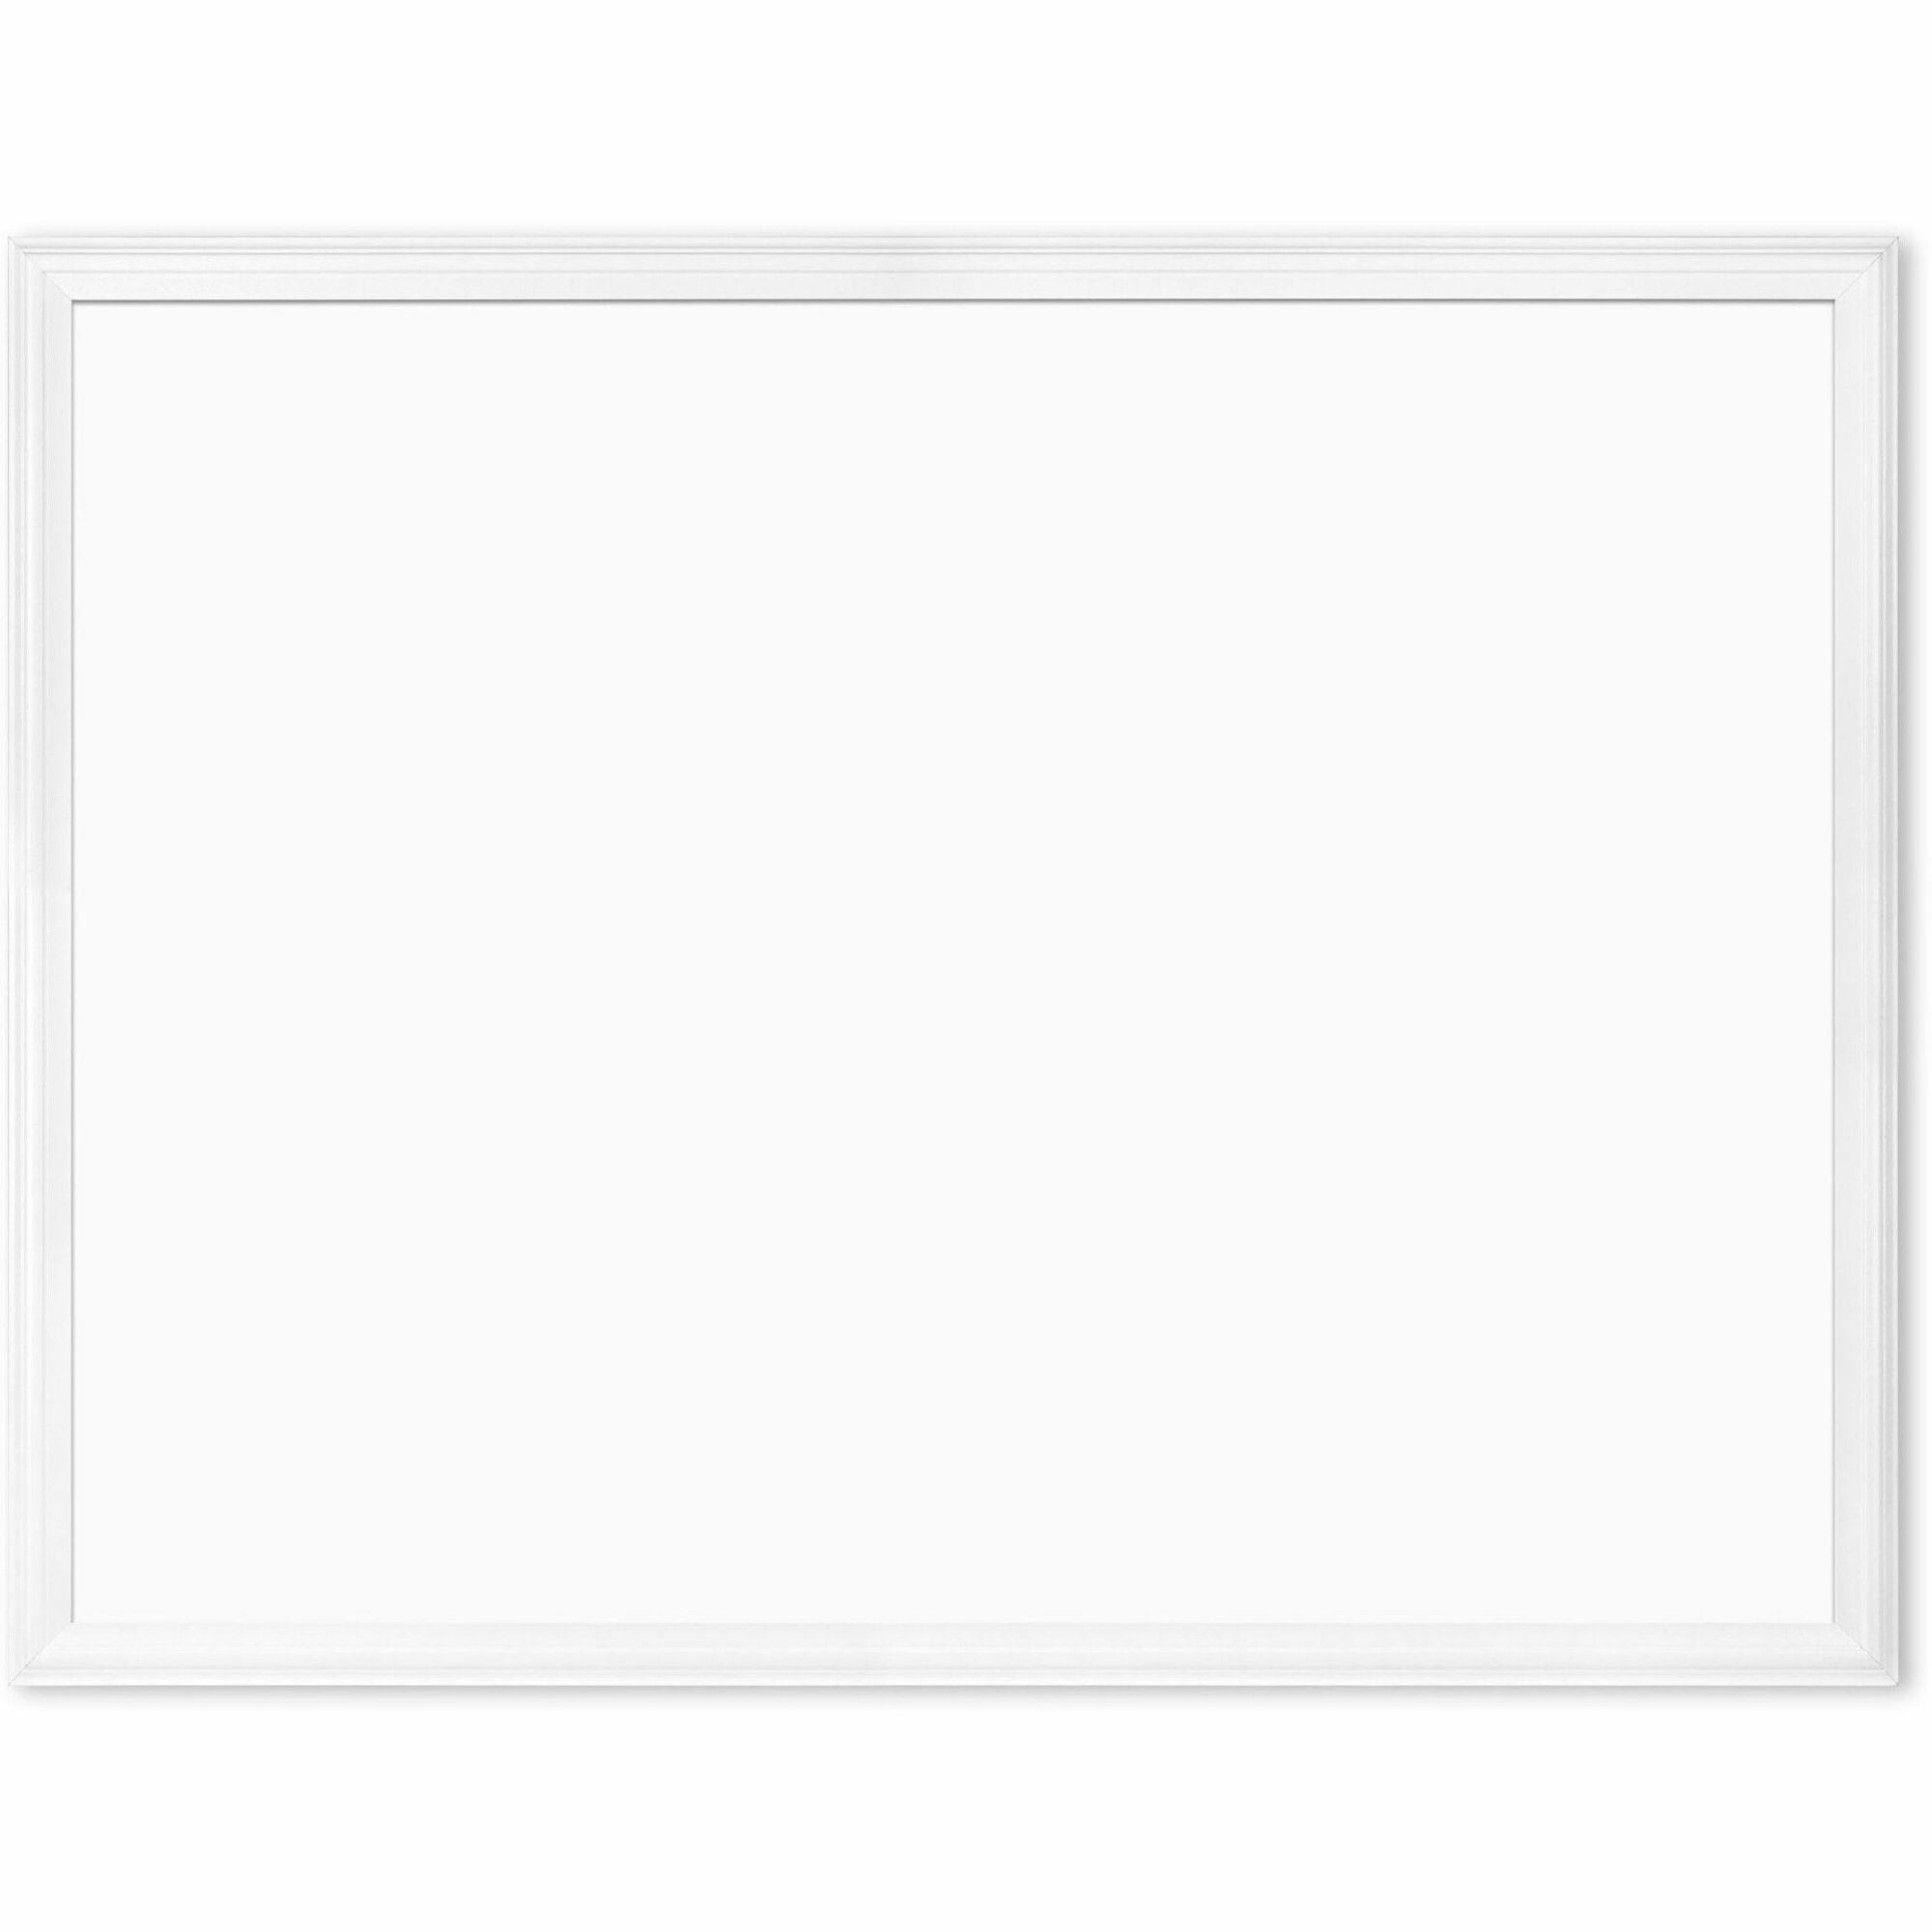 u-brands-magnetic-dry-erase-board-30-25-ft-width-x-40-33-ft-height-white-painted-steel-surface-white-wood-frame-rectangle-horizontal-vertical-1-each_ubr2915u0001 - 1